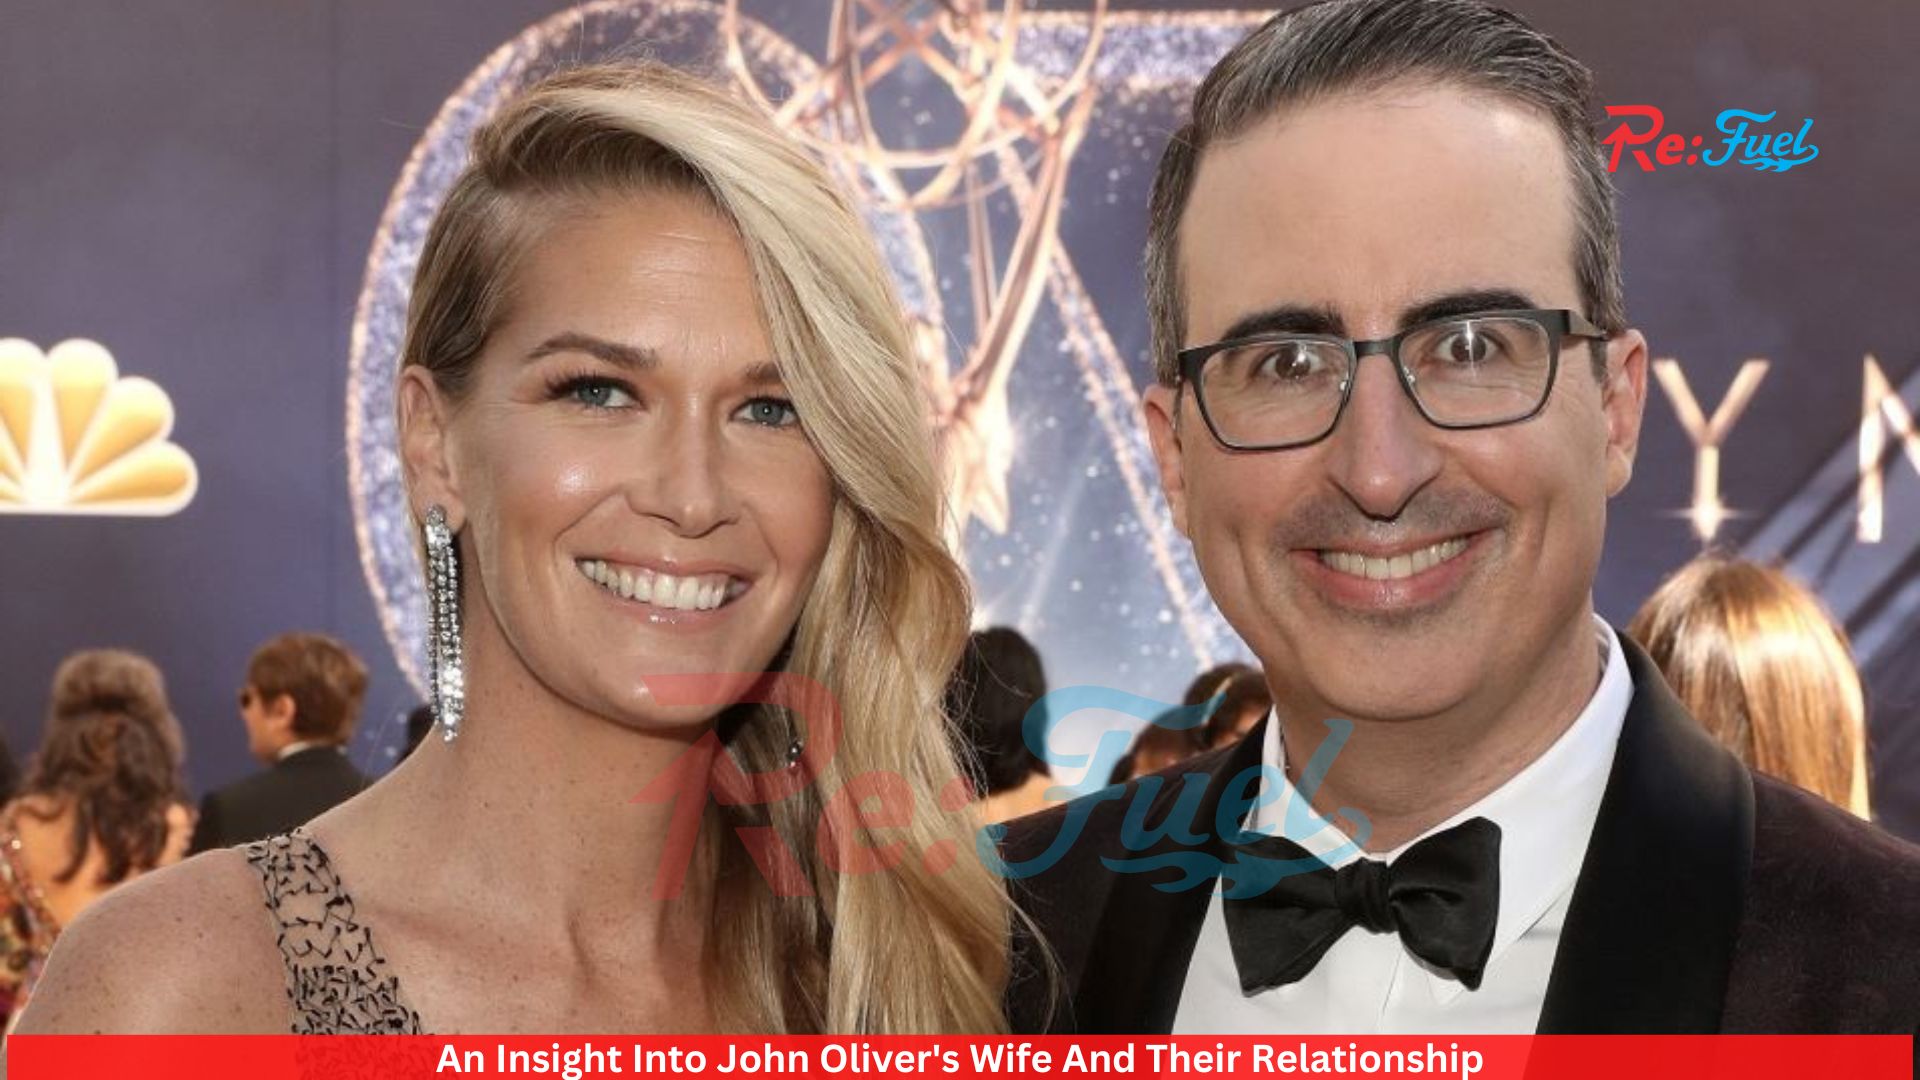 An Insight Into John Oliver's Wife And Their Relationship